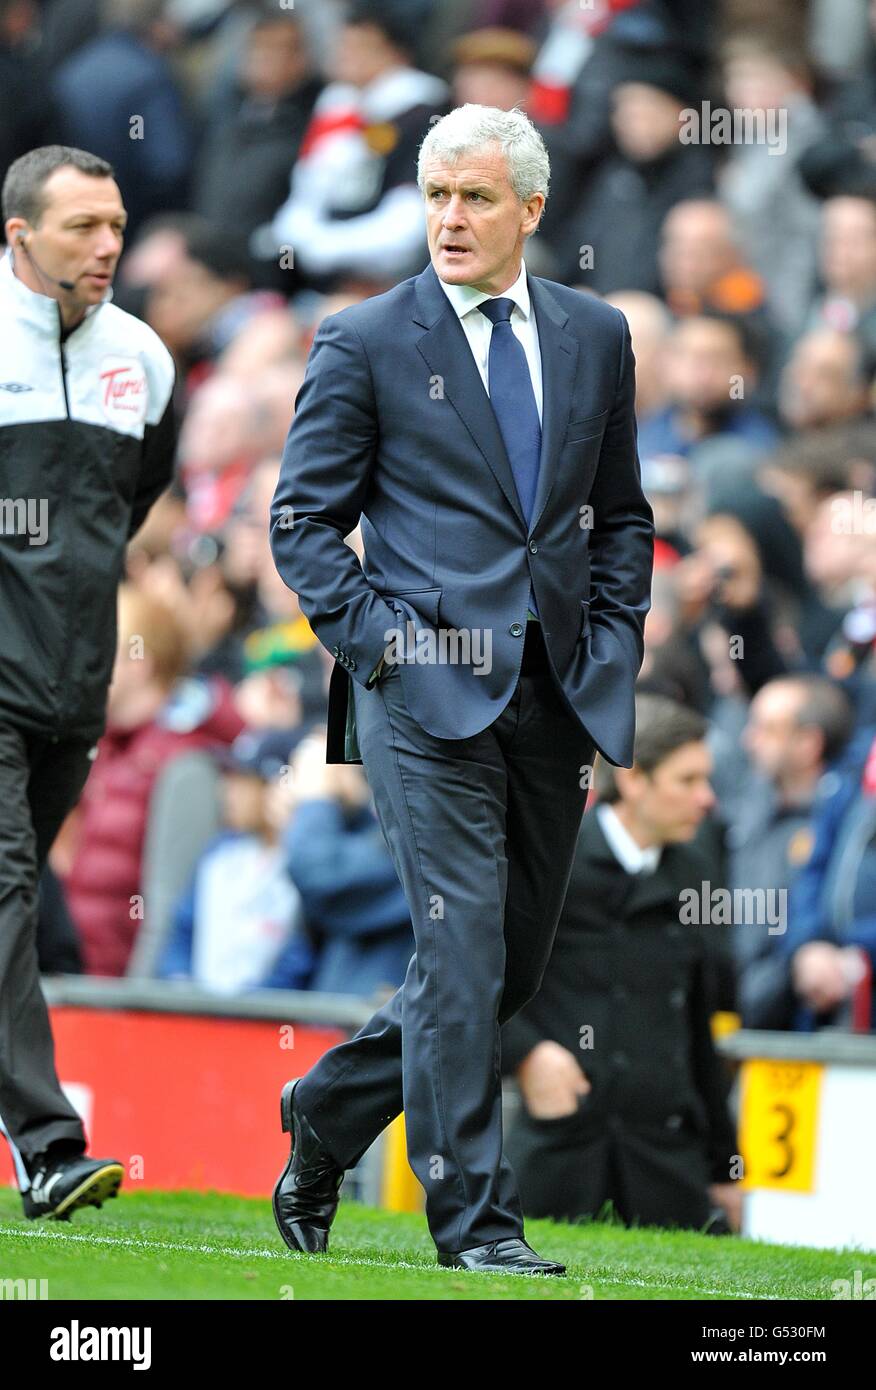 Soccer - Barclays Premier League - Manchester United v Queens Park Rangers - Old Trafford. Queens Park Rangers manager Mark Hughes looks towards the match officials as he walks off the pitch at half time Stock Photo